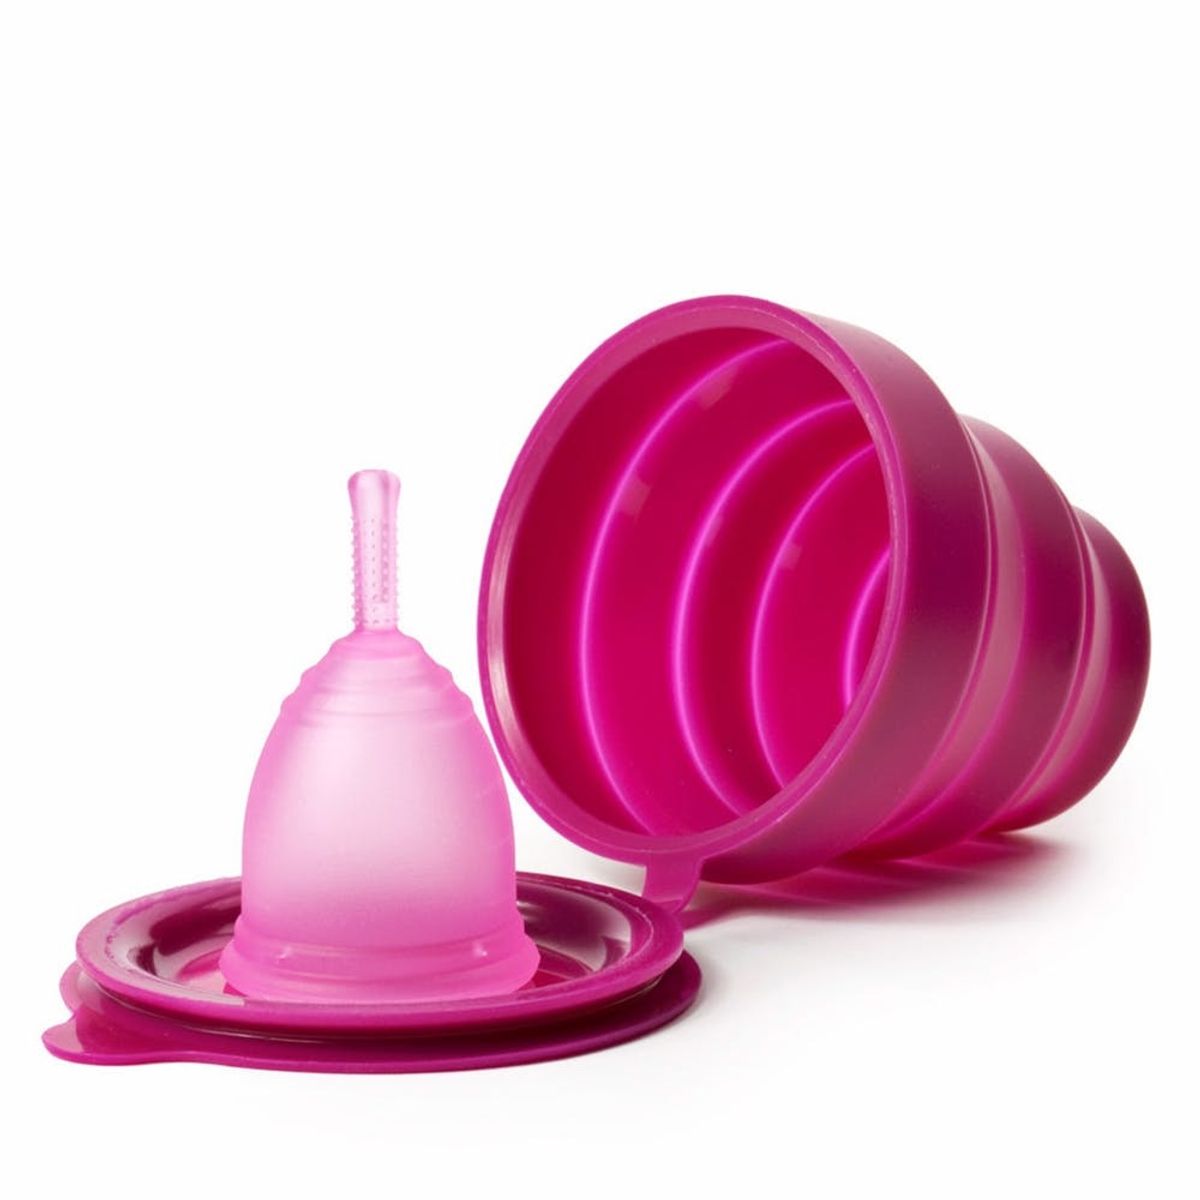 We Tried Menstrual Cups for the First Time + Here’s What We Thought